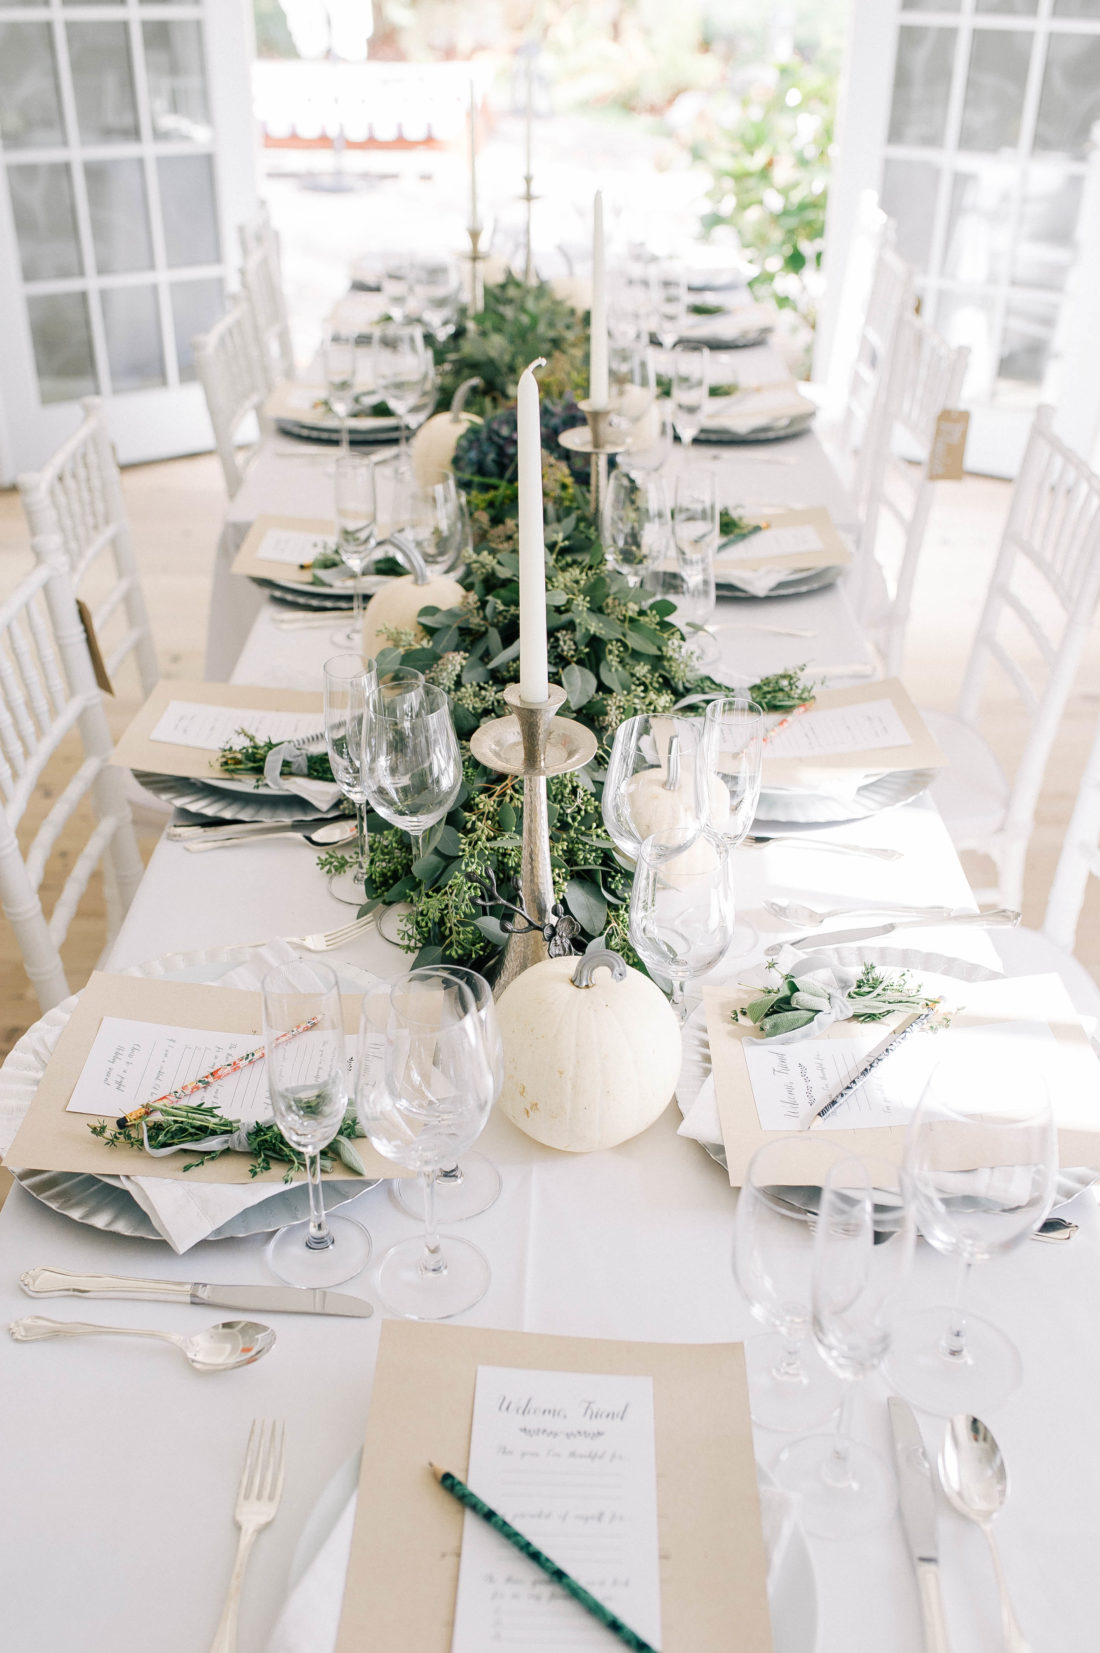 Crisp and modern white, flax, and silver tablescape at Eva Amurri Martino's Friendsgiving, featuring a long eucalyptus garland and white pumpkins